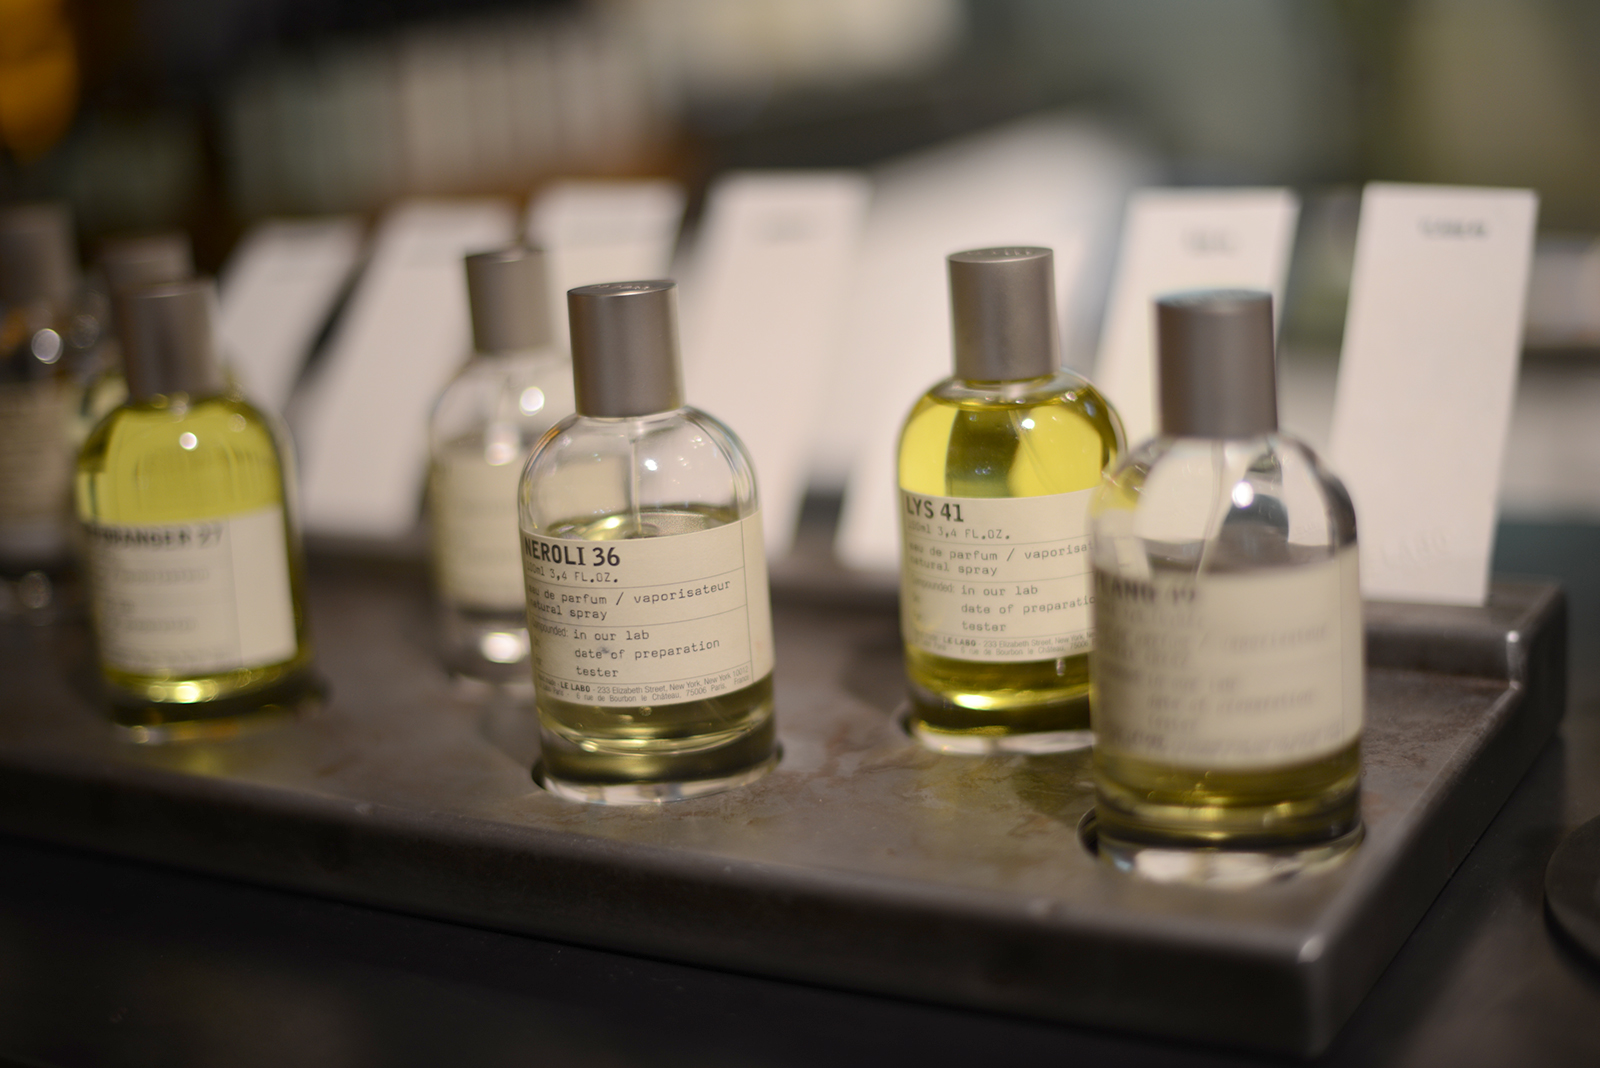 Le Labo perfume at Liberty London - Notes From A Stylist